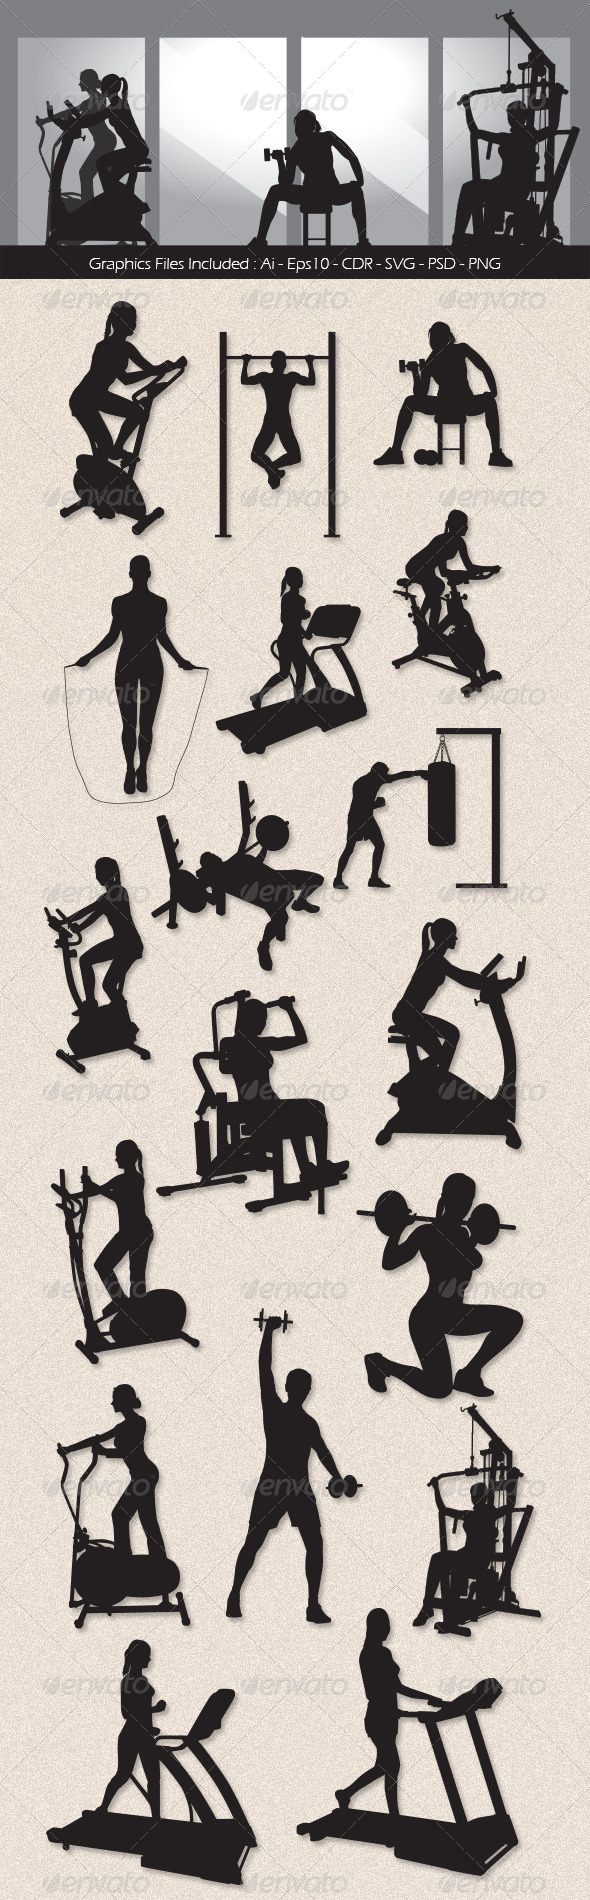 Workout Silhouettes